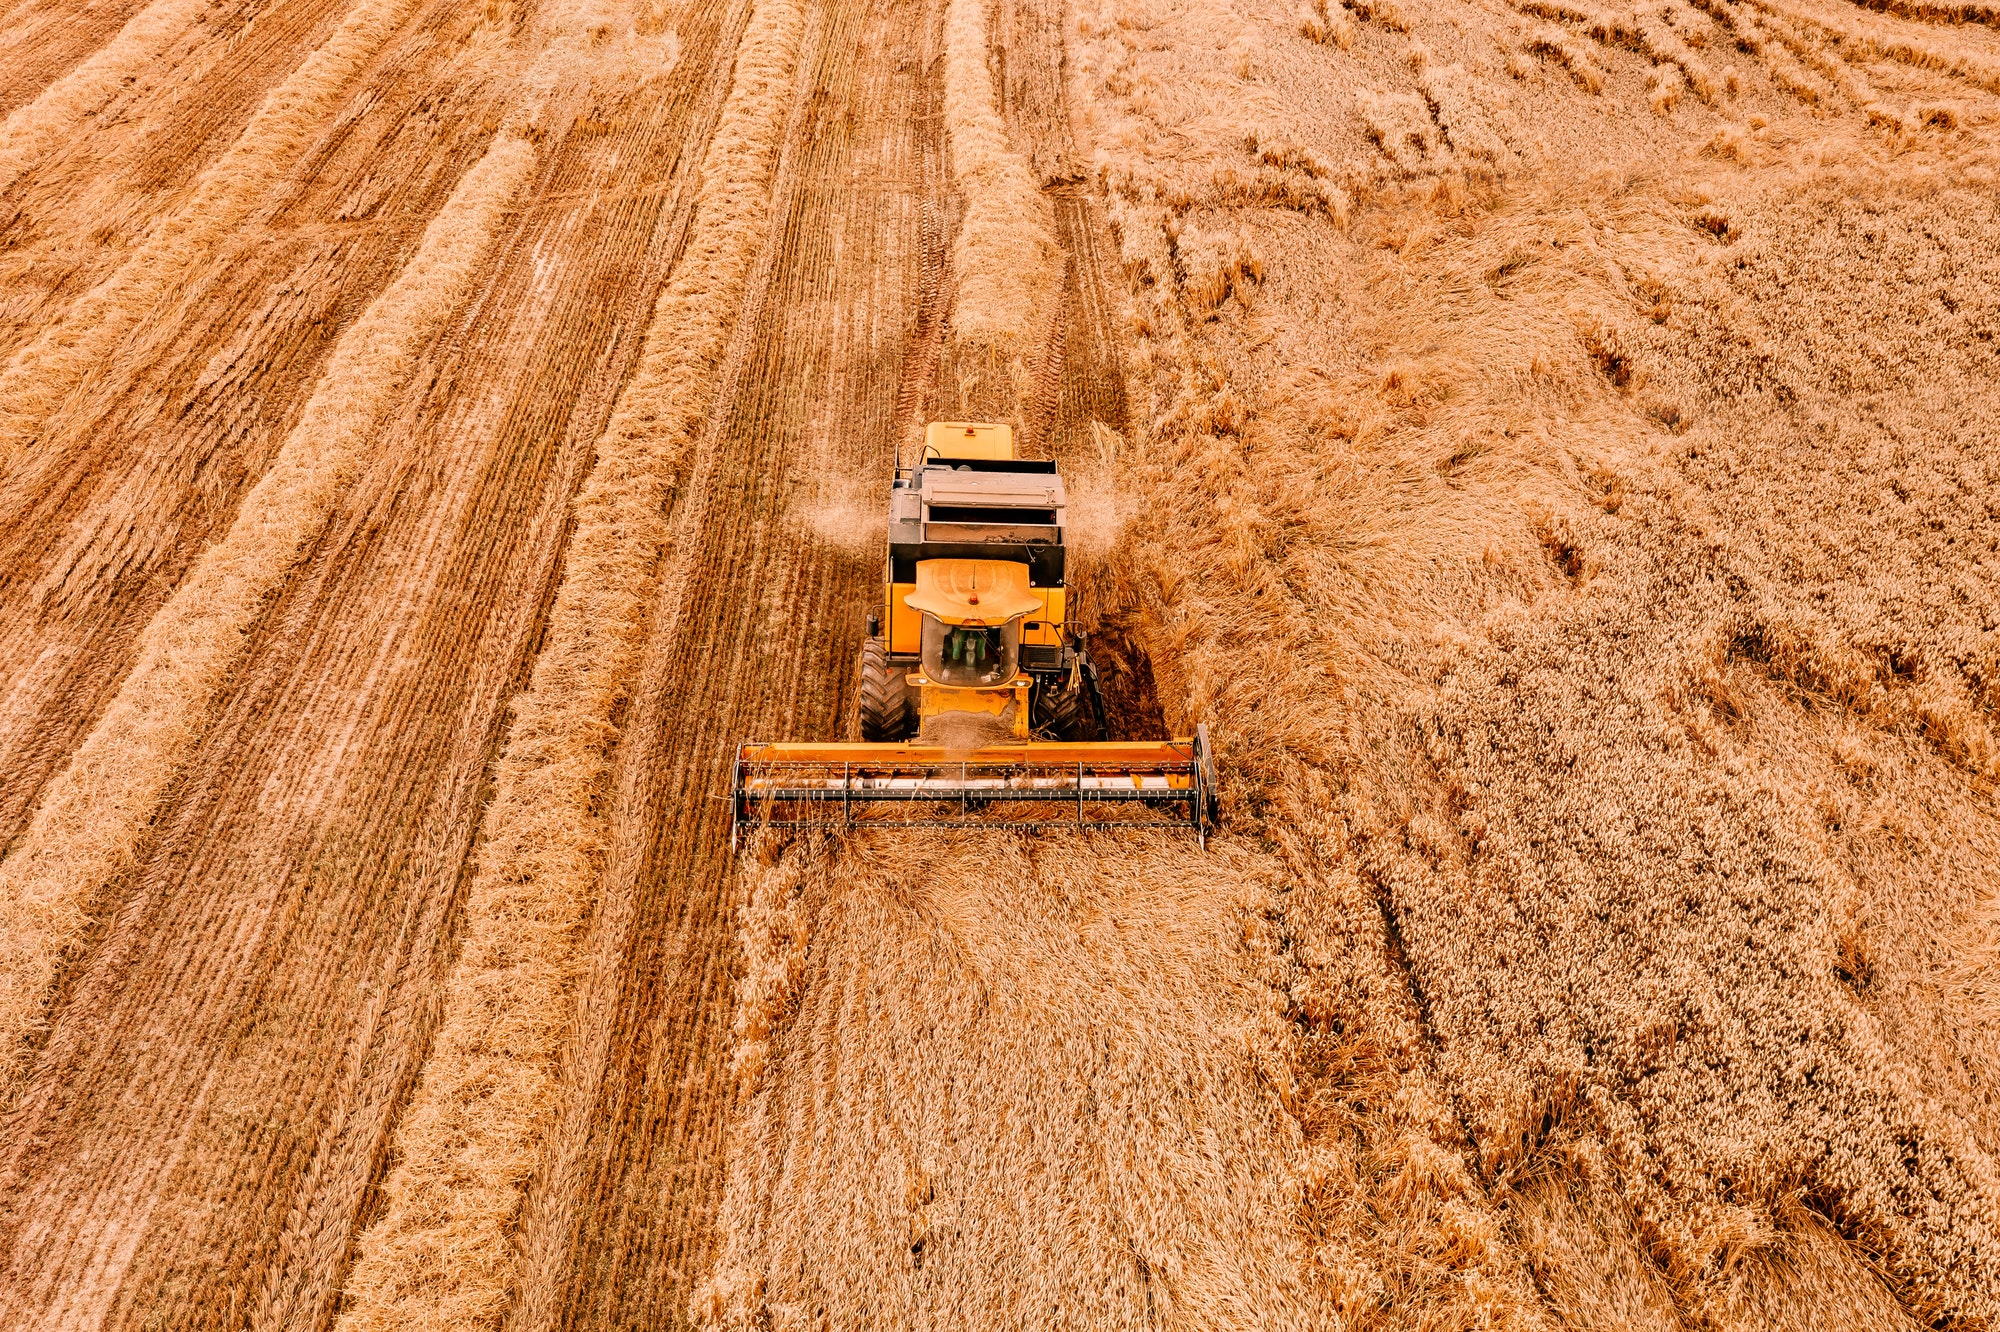 Aerial view of the combine harvester agriculture machine working on ripe wheat field.